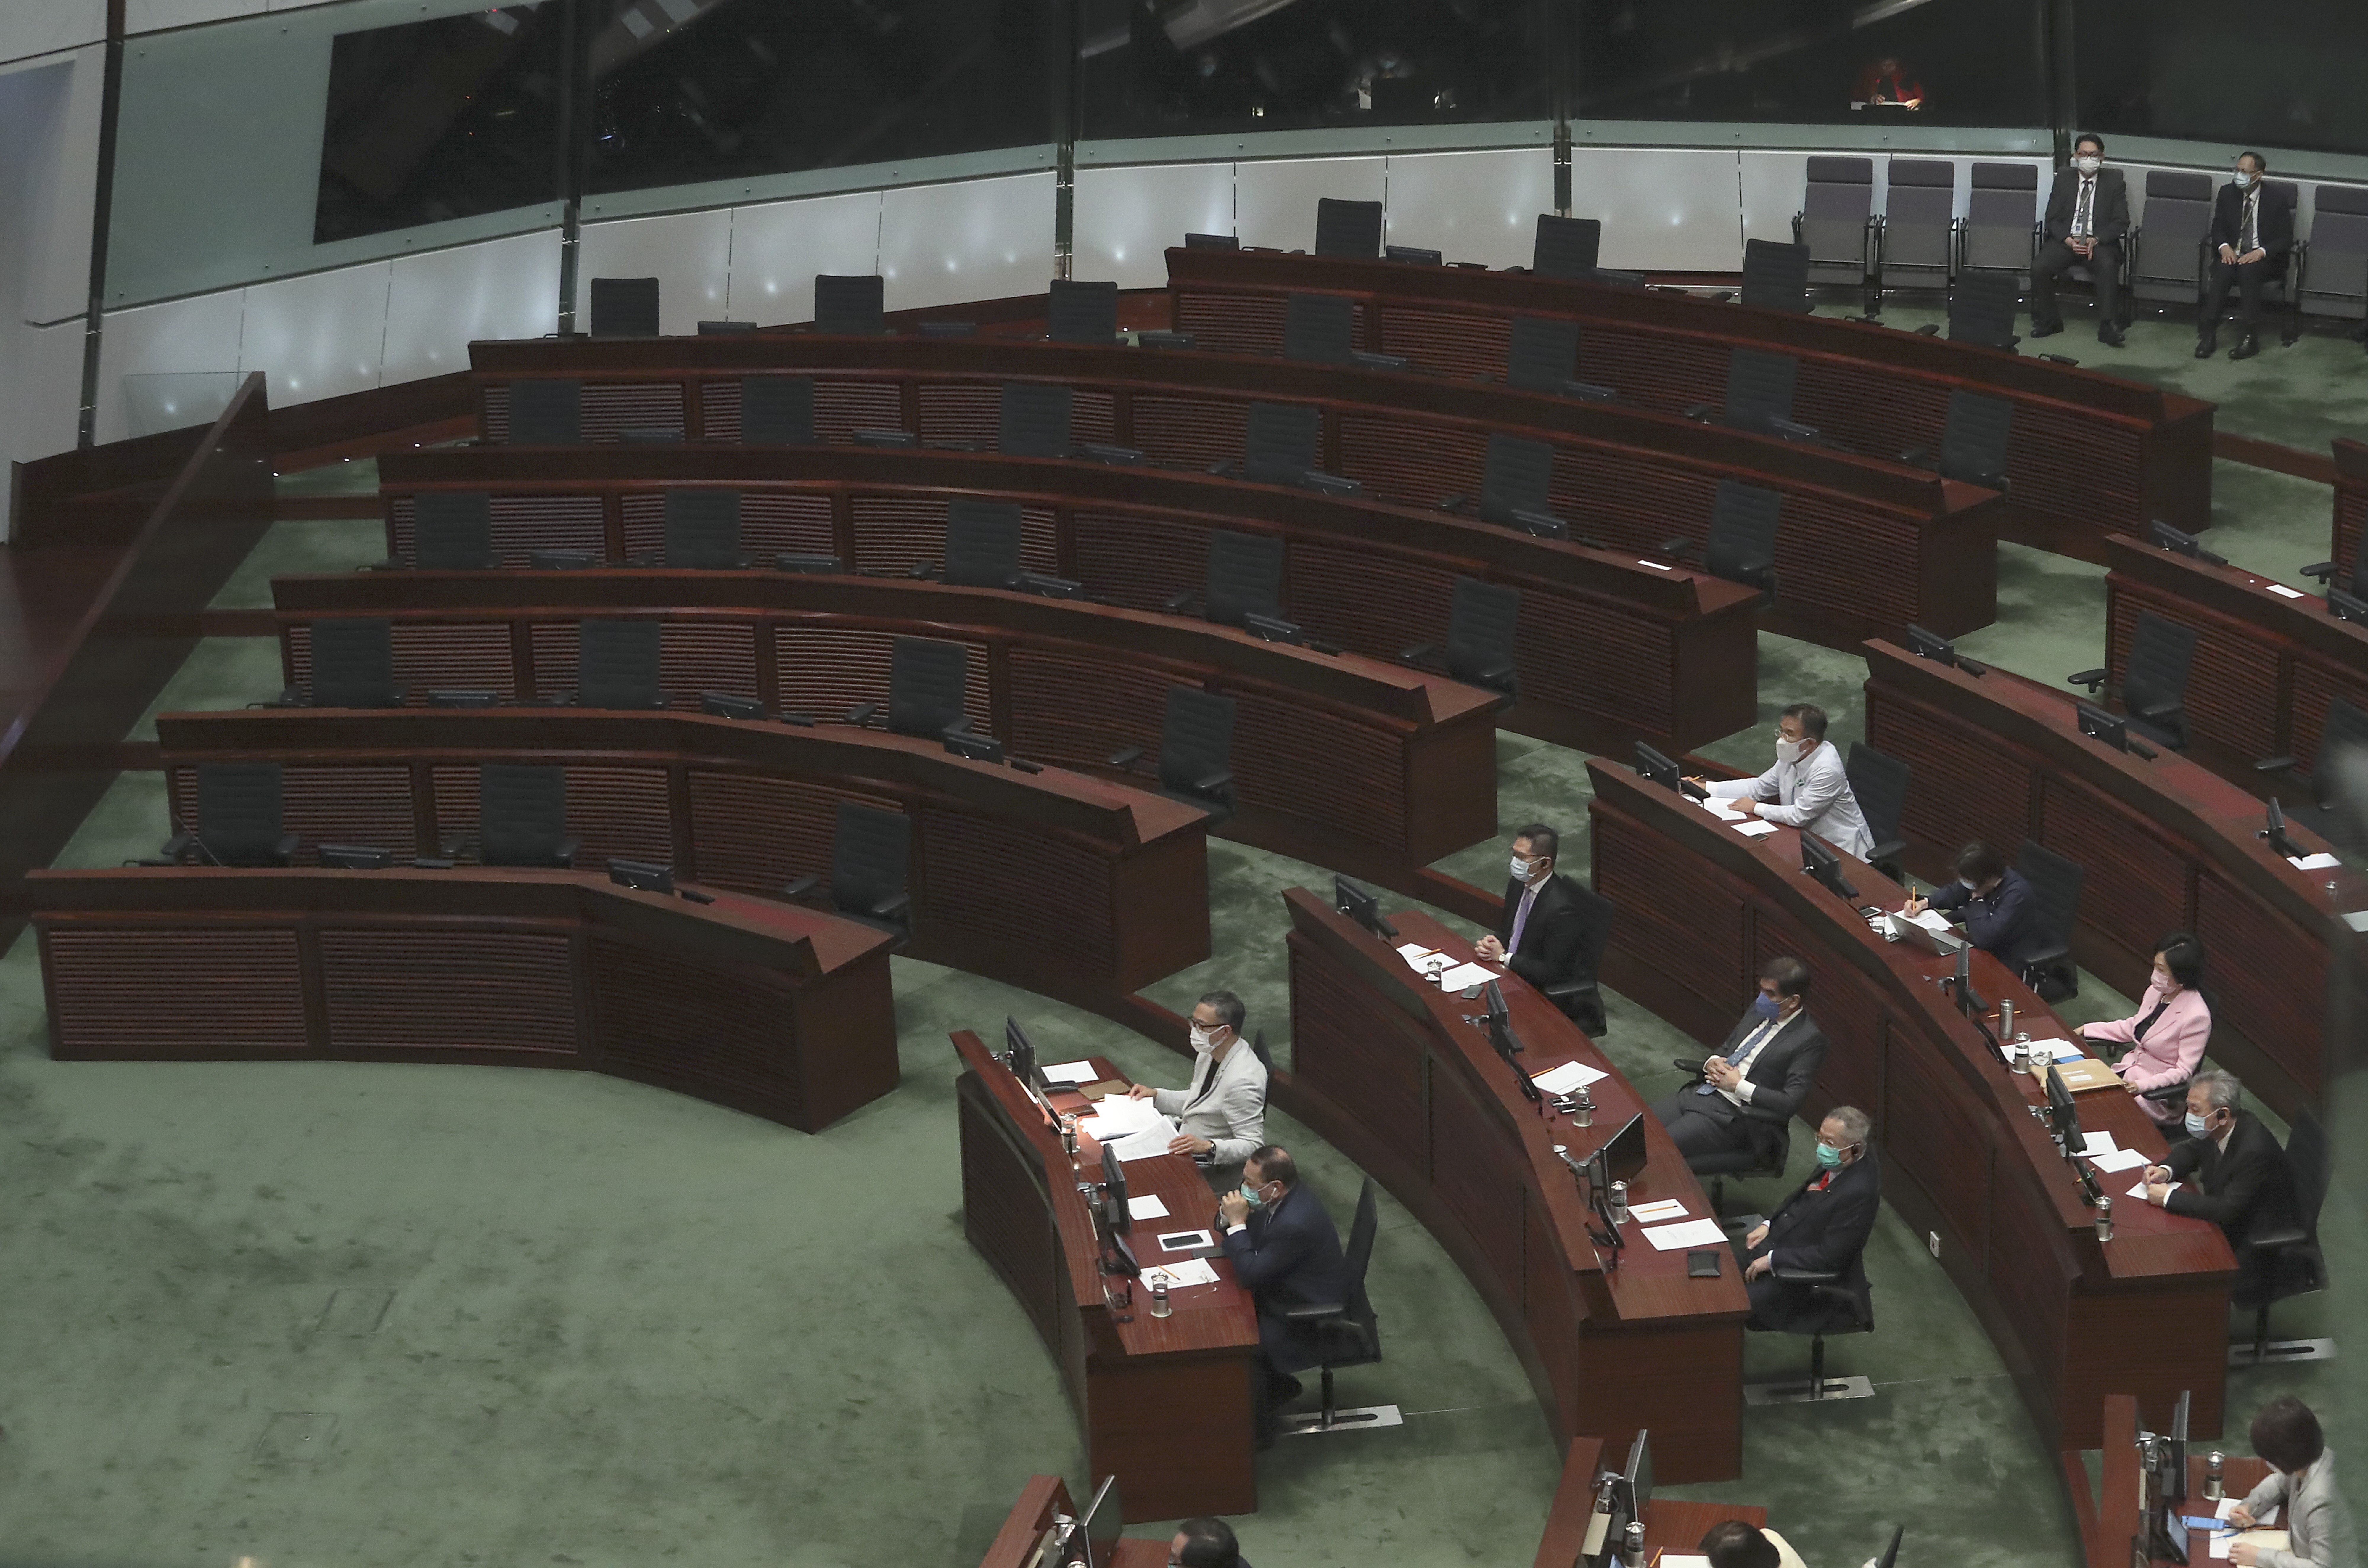 Hong Kong lawmakers listen as Hong Kong’s 2020 policy address is delivered in the Legislative Council chamber on November 25. The empty seats on the left are where the pan-democratic camp used to be seated. Photo: Dickson Lee